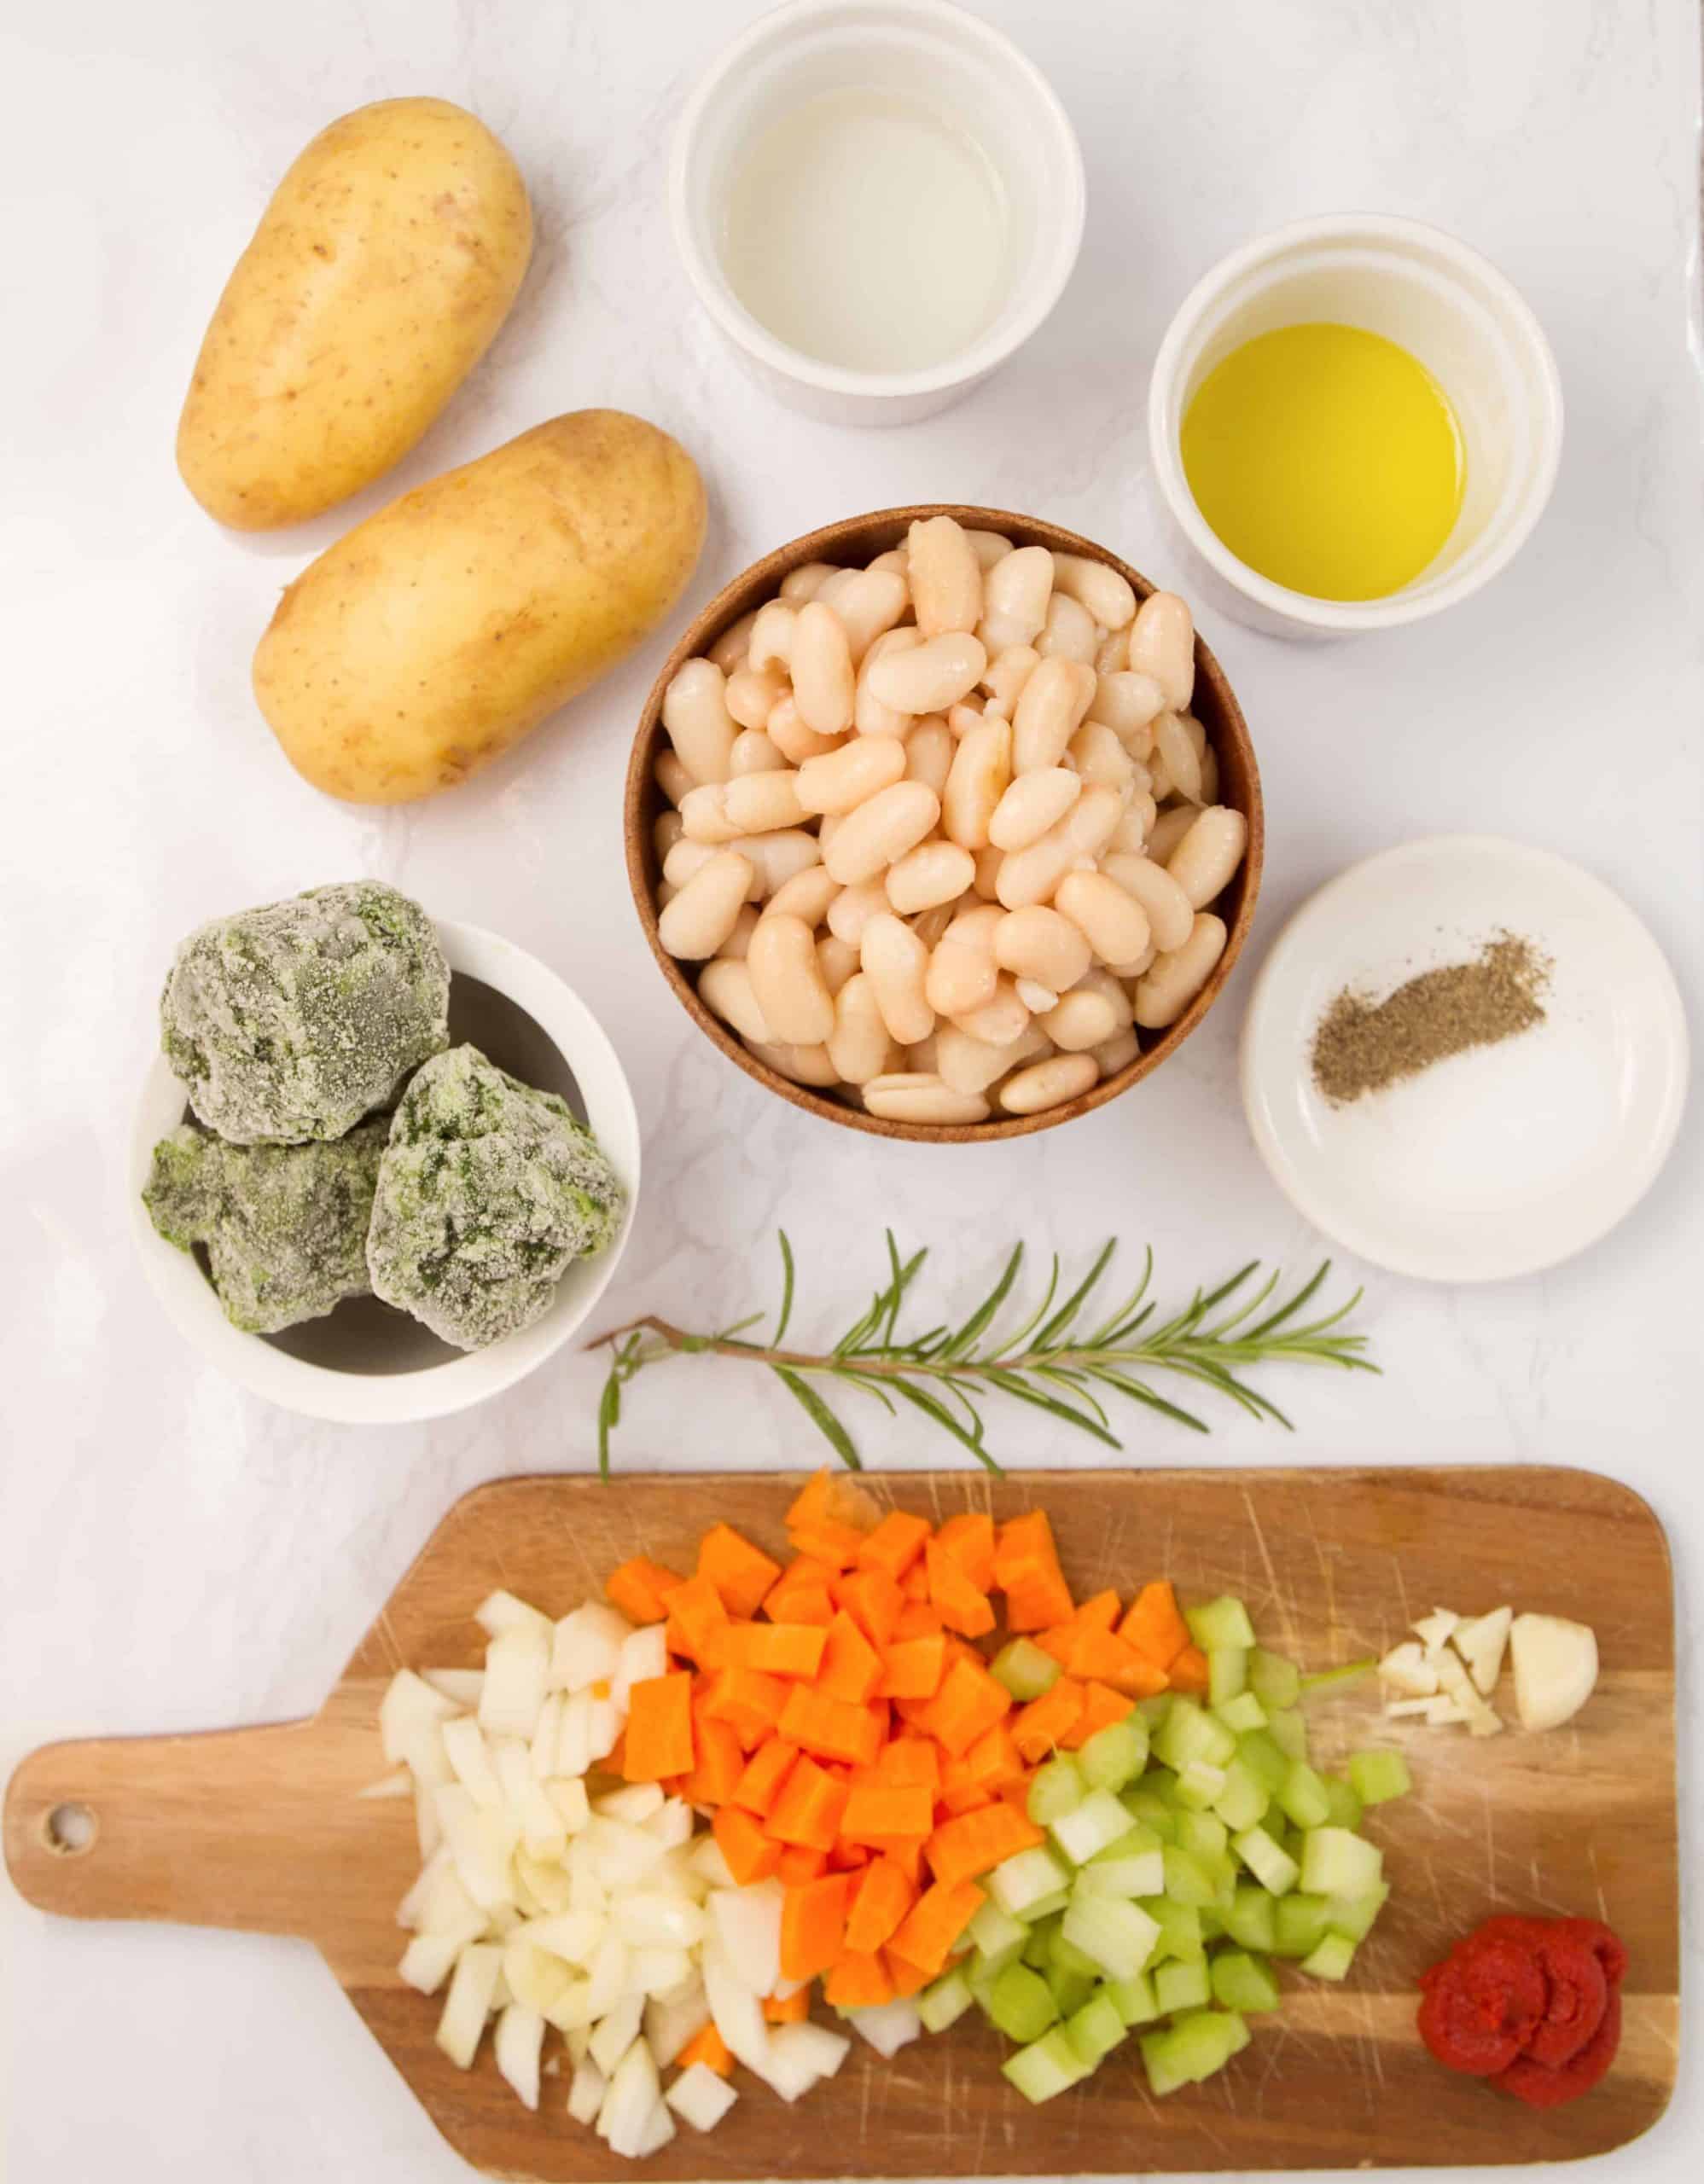 The ingredients for this white bean soup are arranged over a white table.